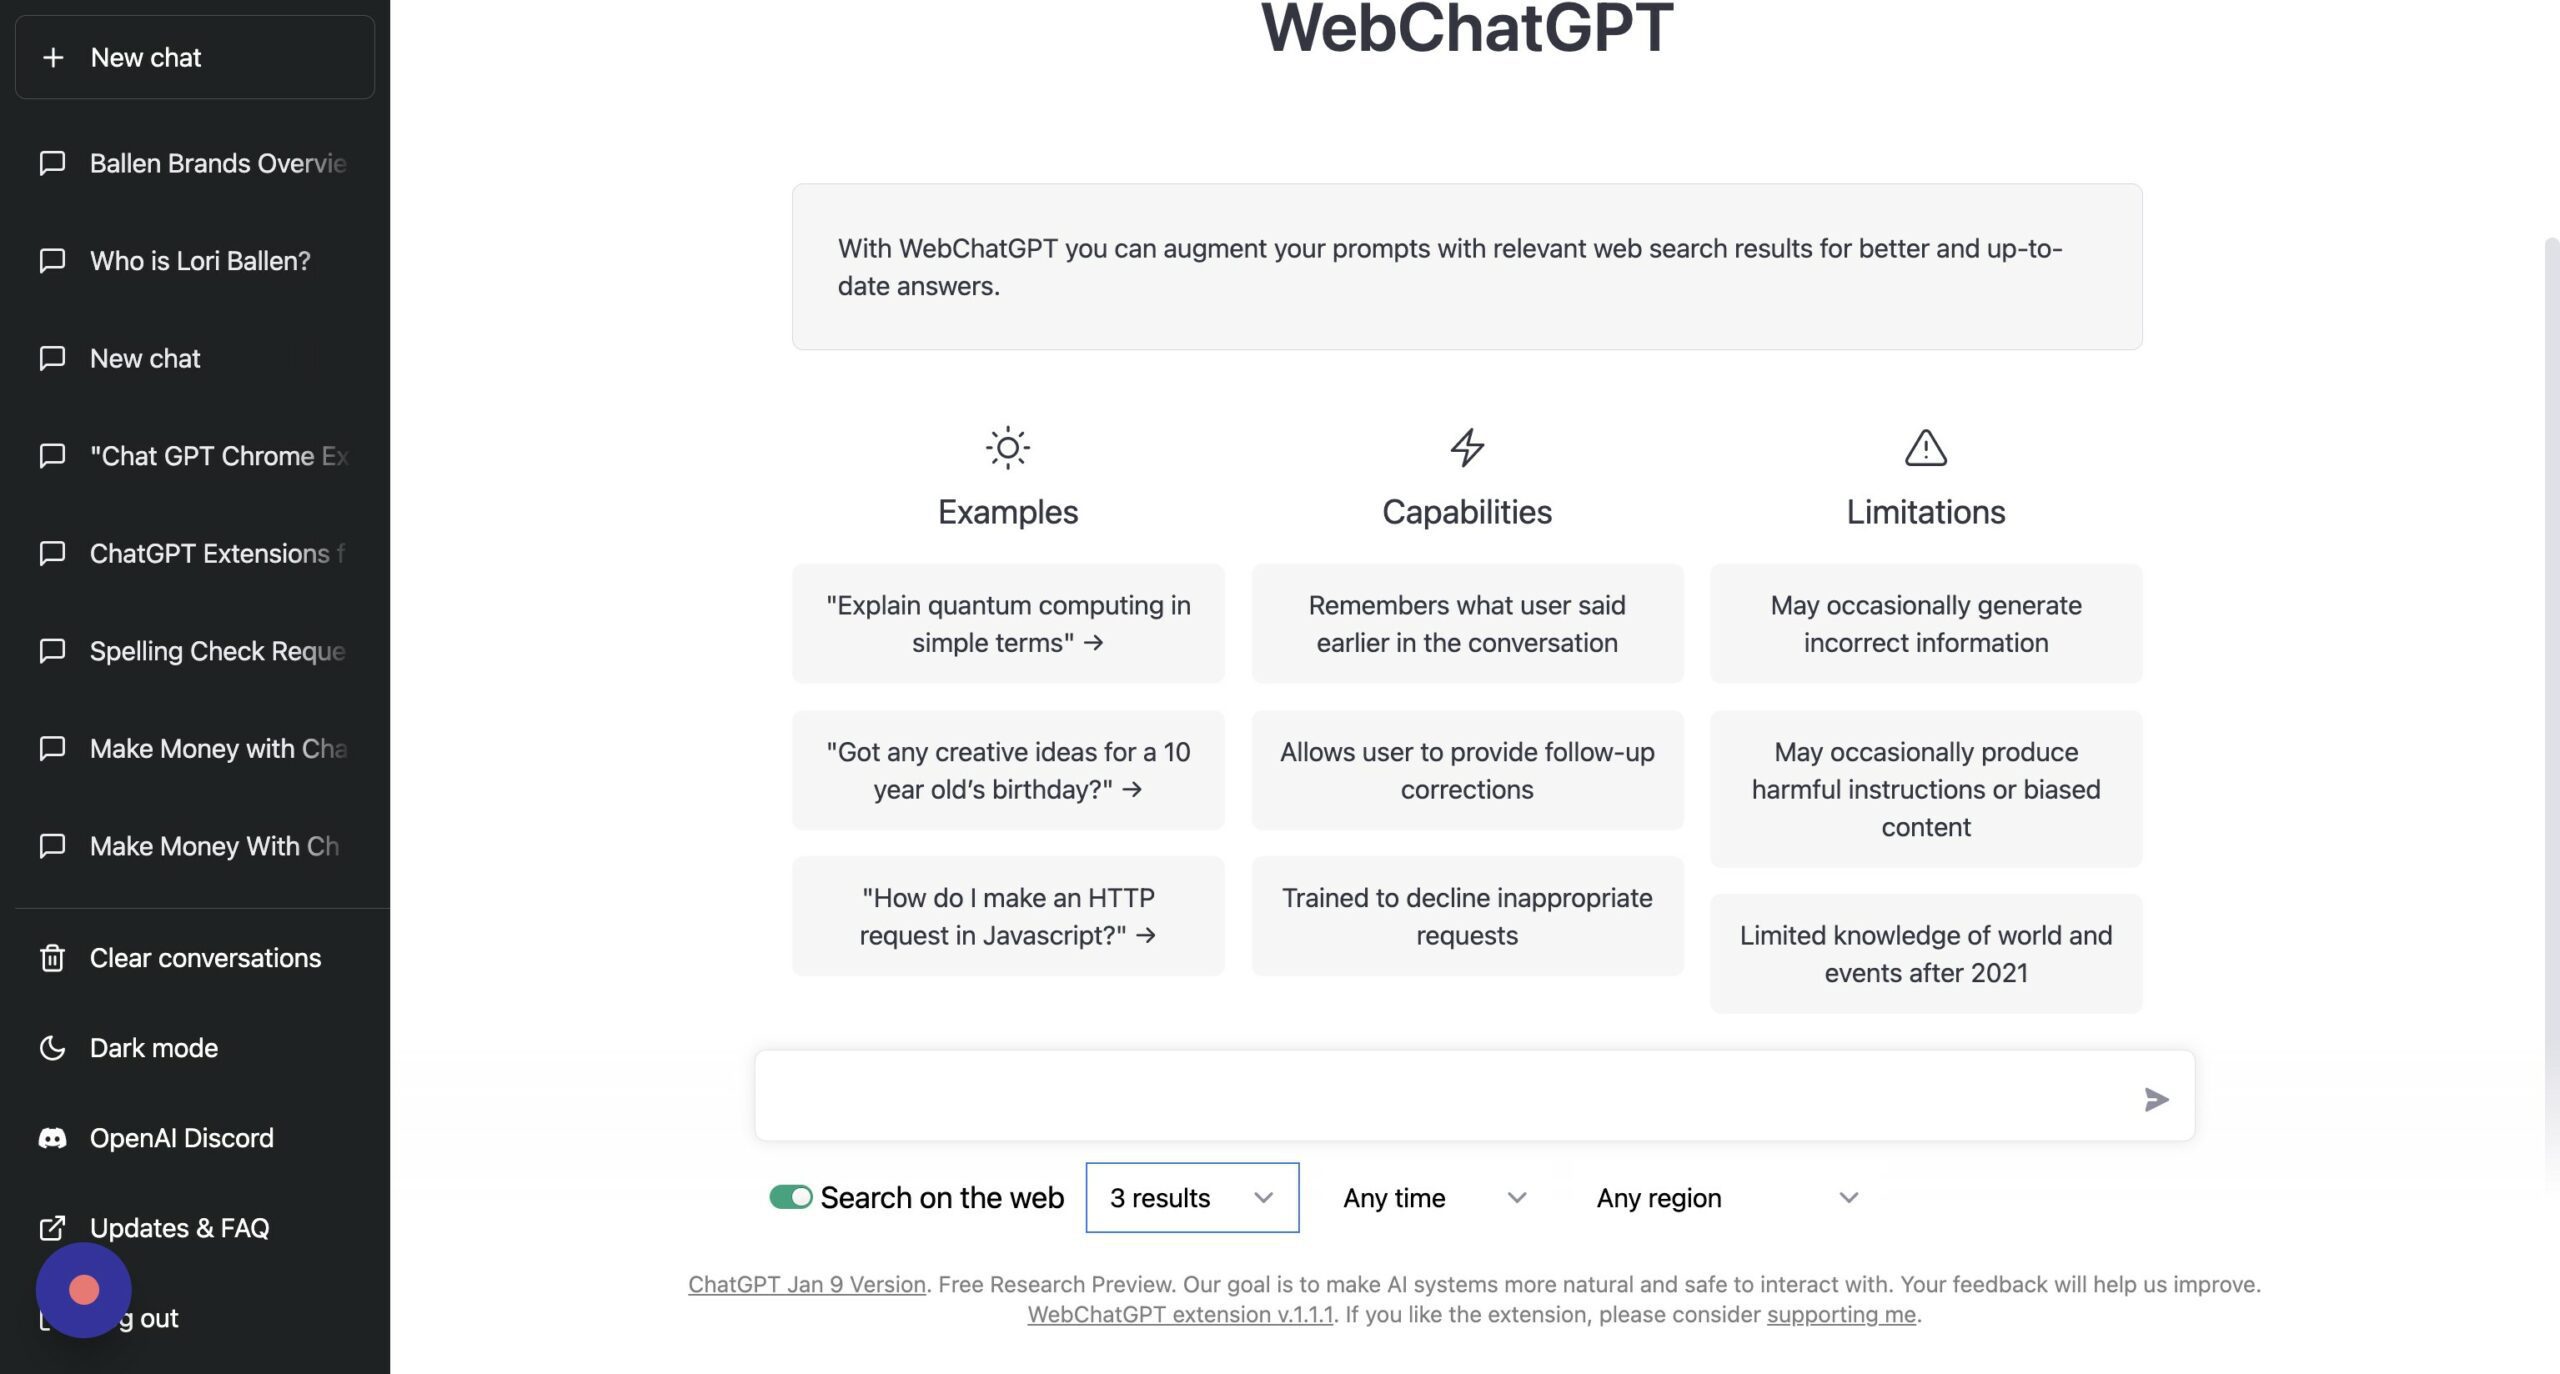 ChatGPT with WebChatGPT installed